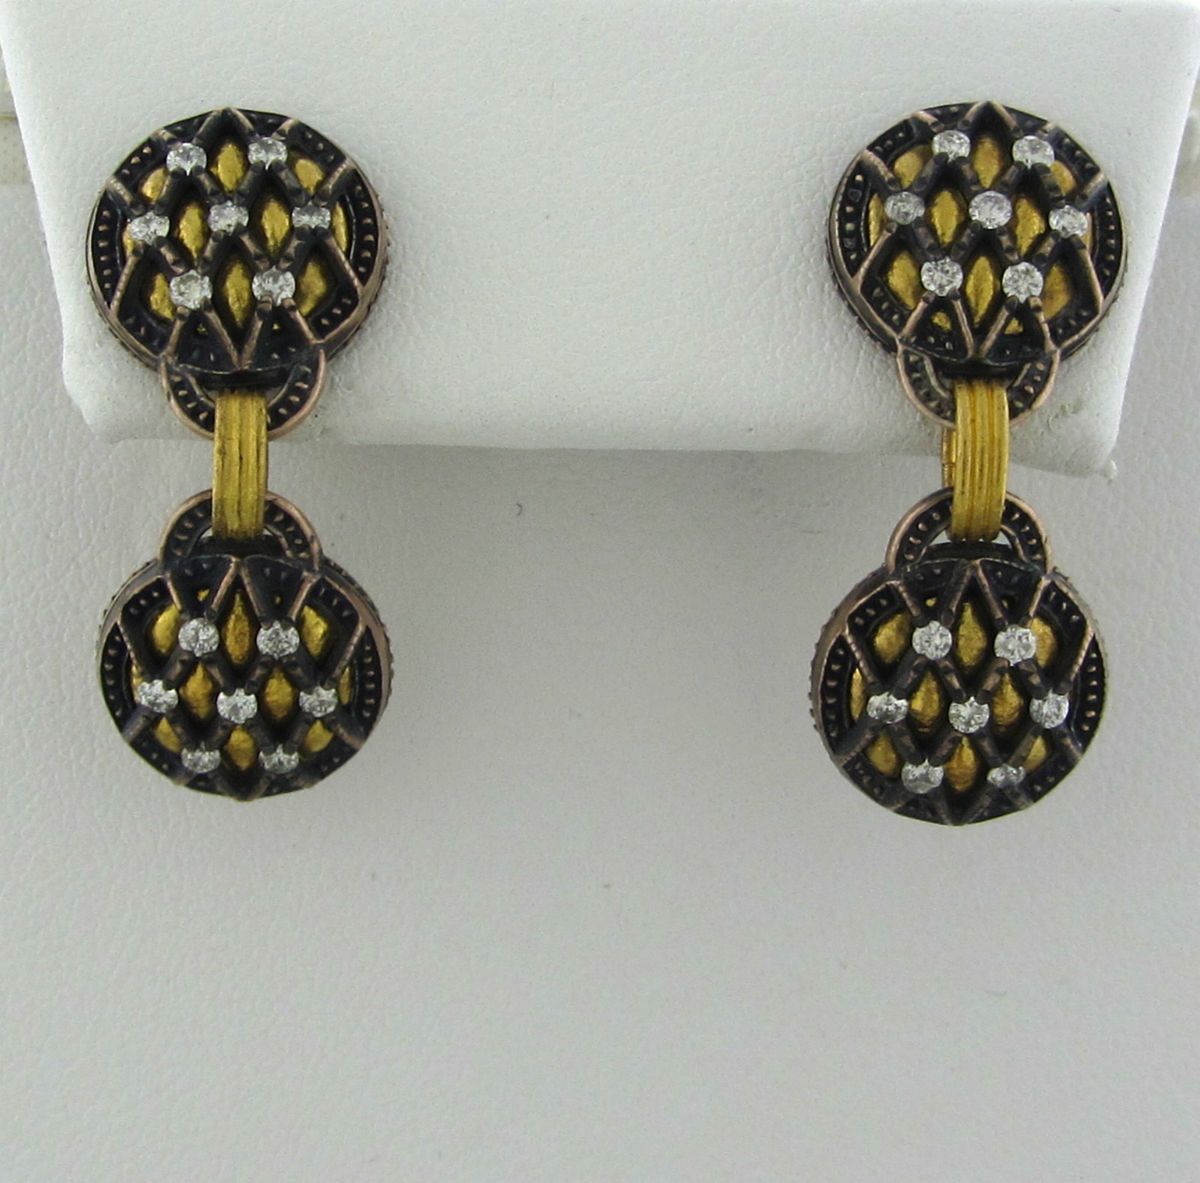 New Gurhan Capitone Collection 24K Yellow Gold Diamond Earrings $3300